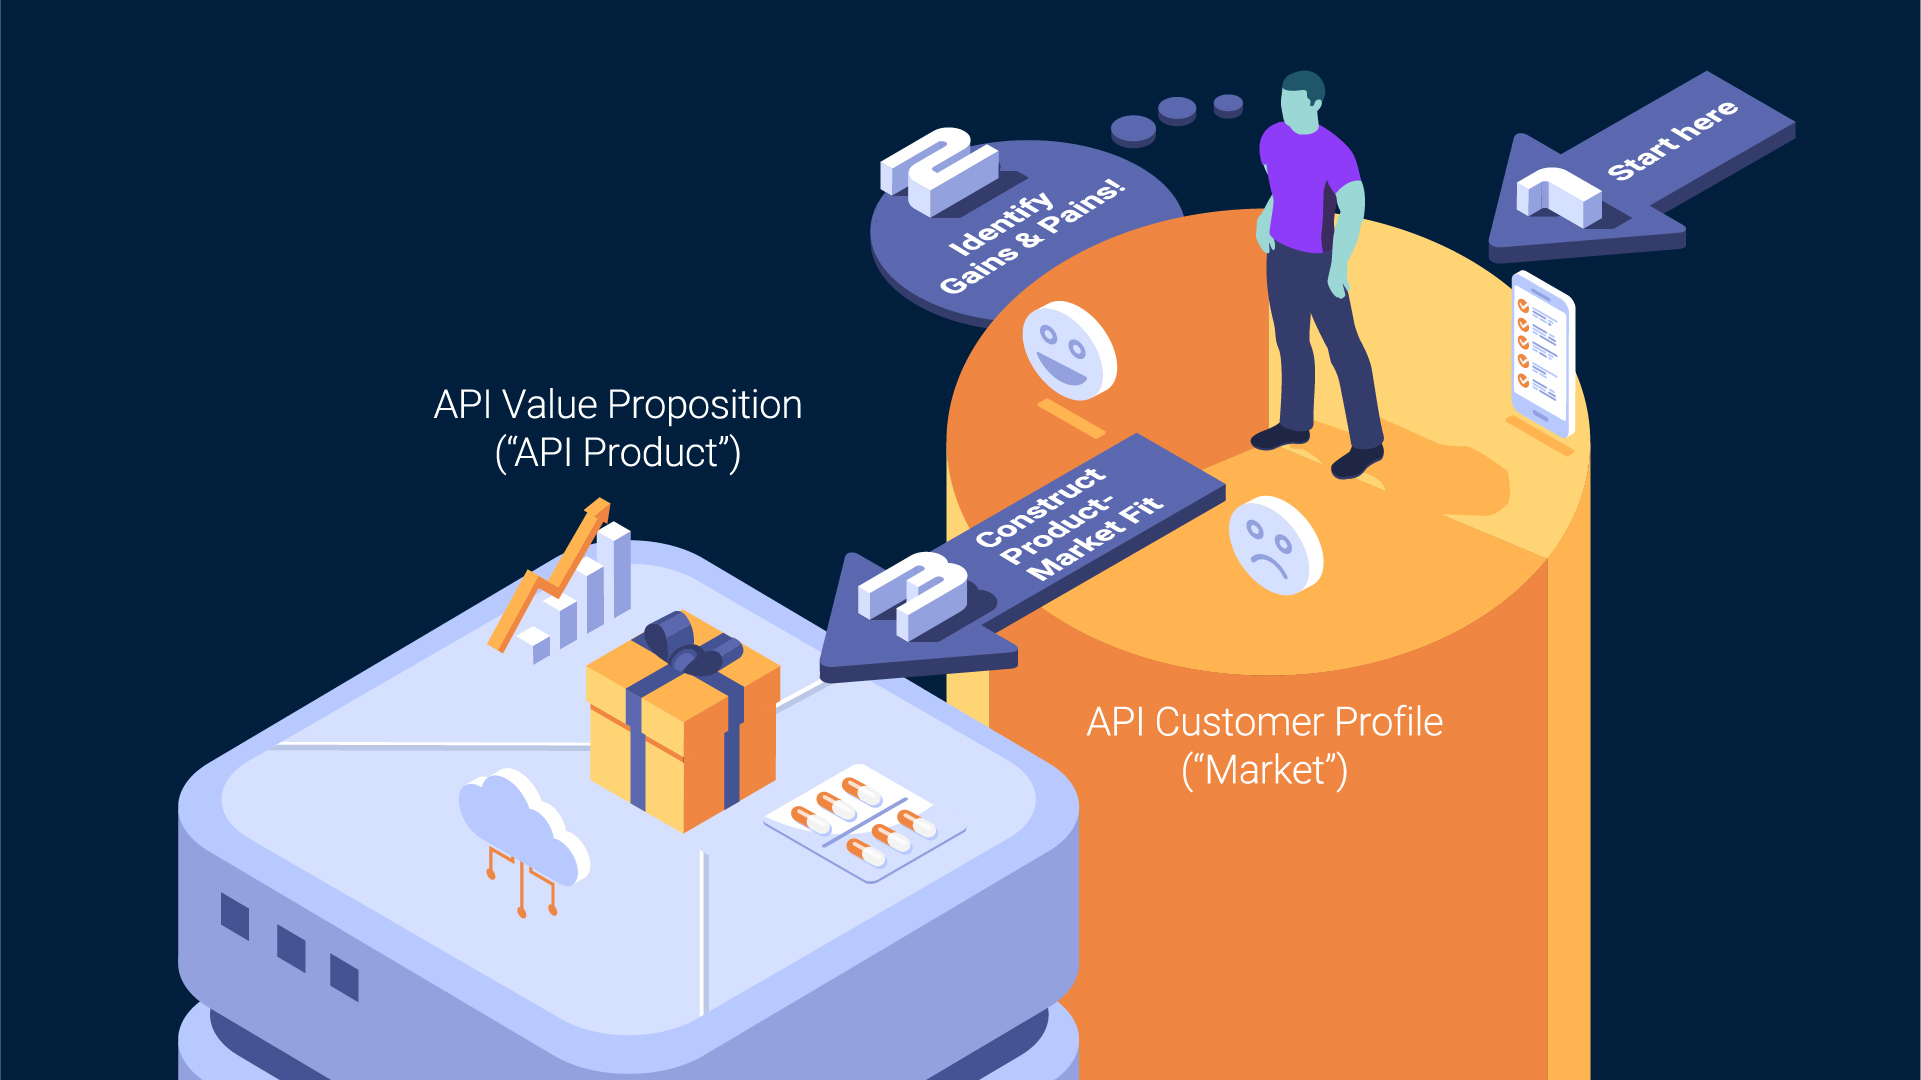 Don’t start with your API, start with your customers